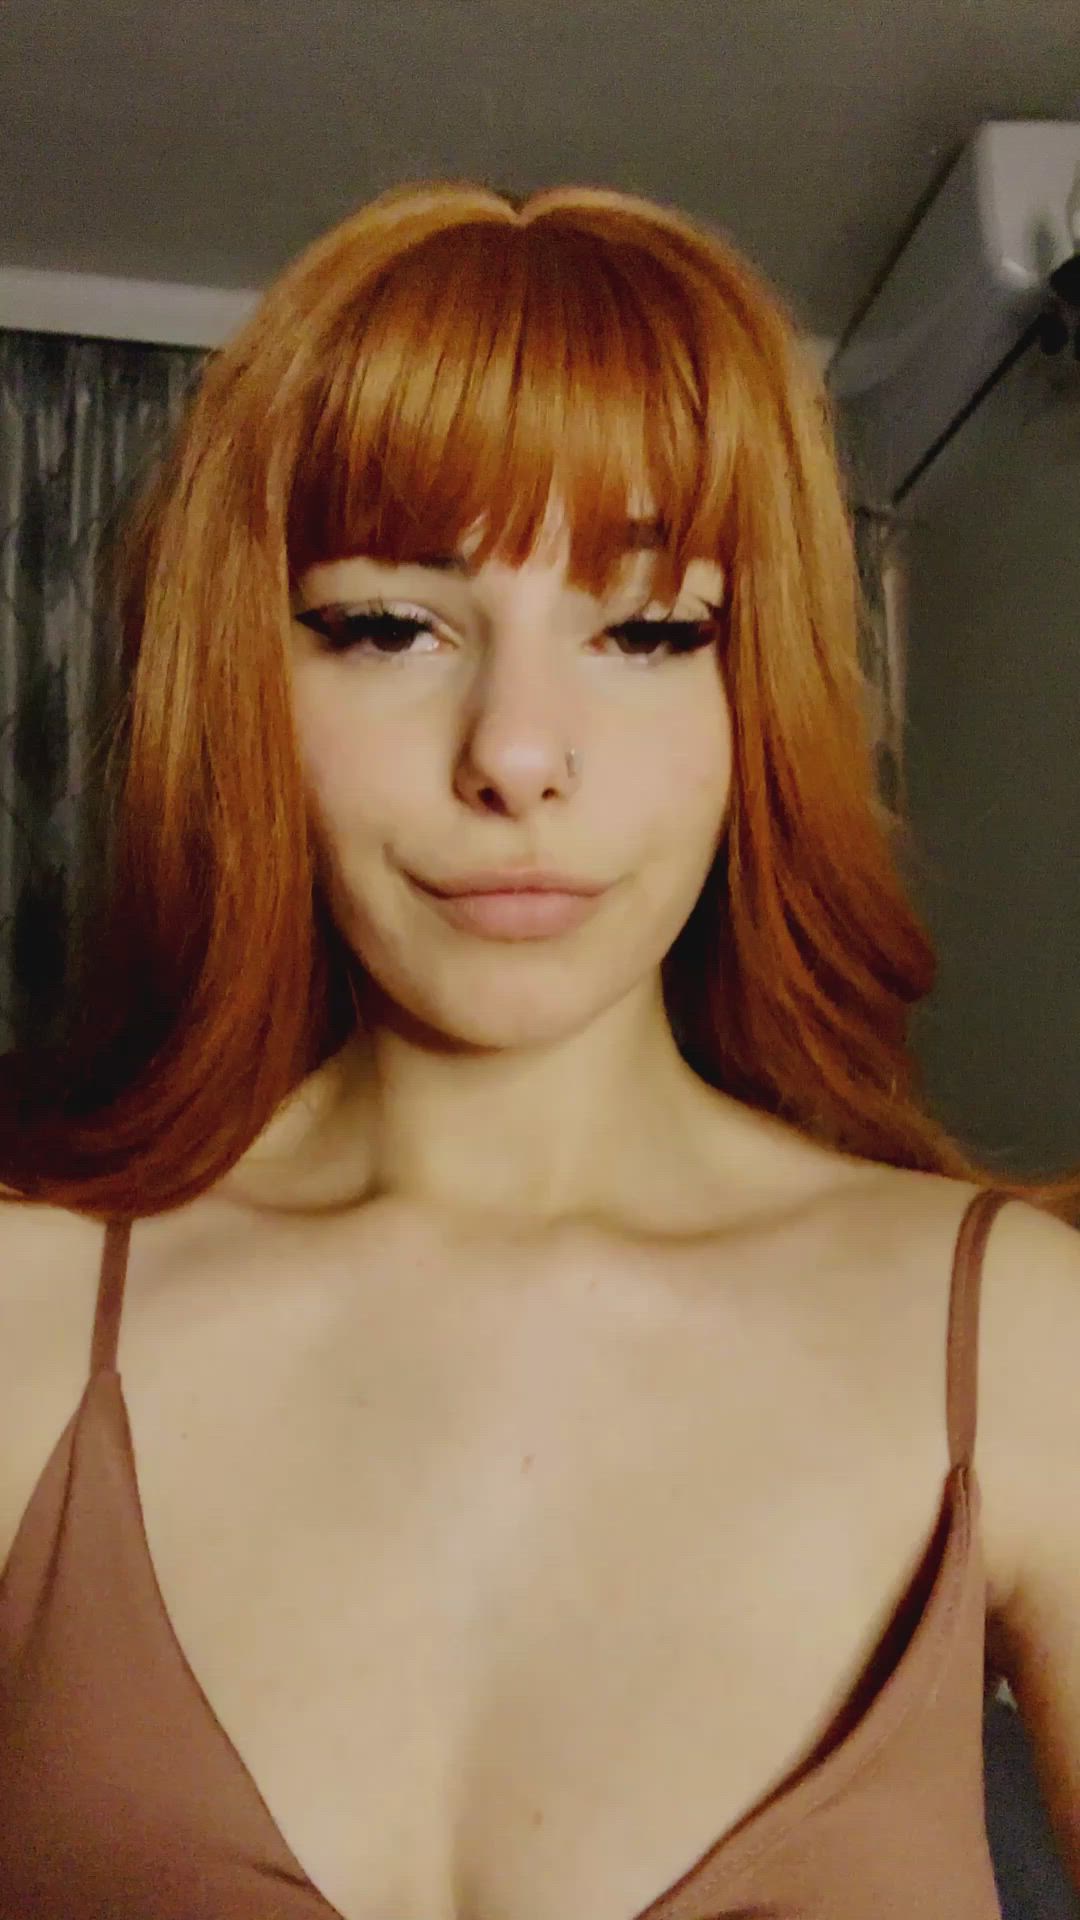 Teen porn video with onlyfans model misscherryblossom <strong>@adrianna_daisy</strong>